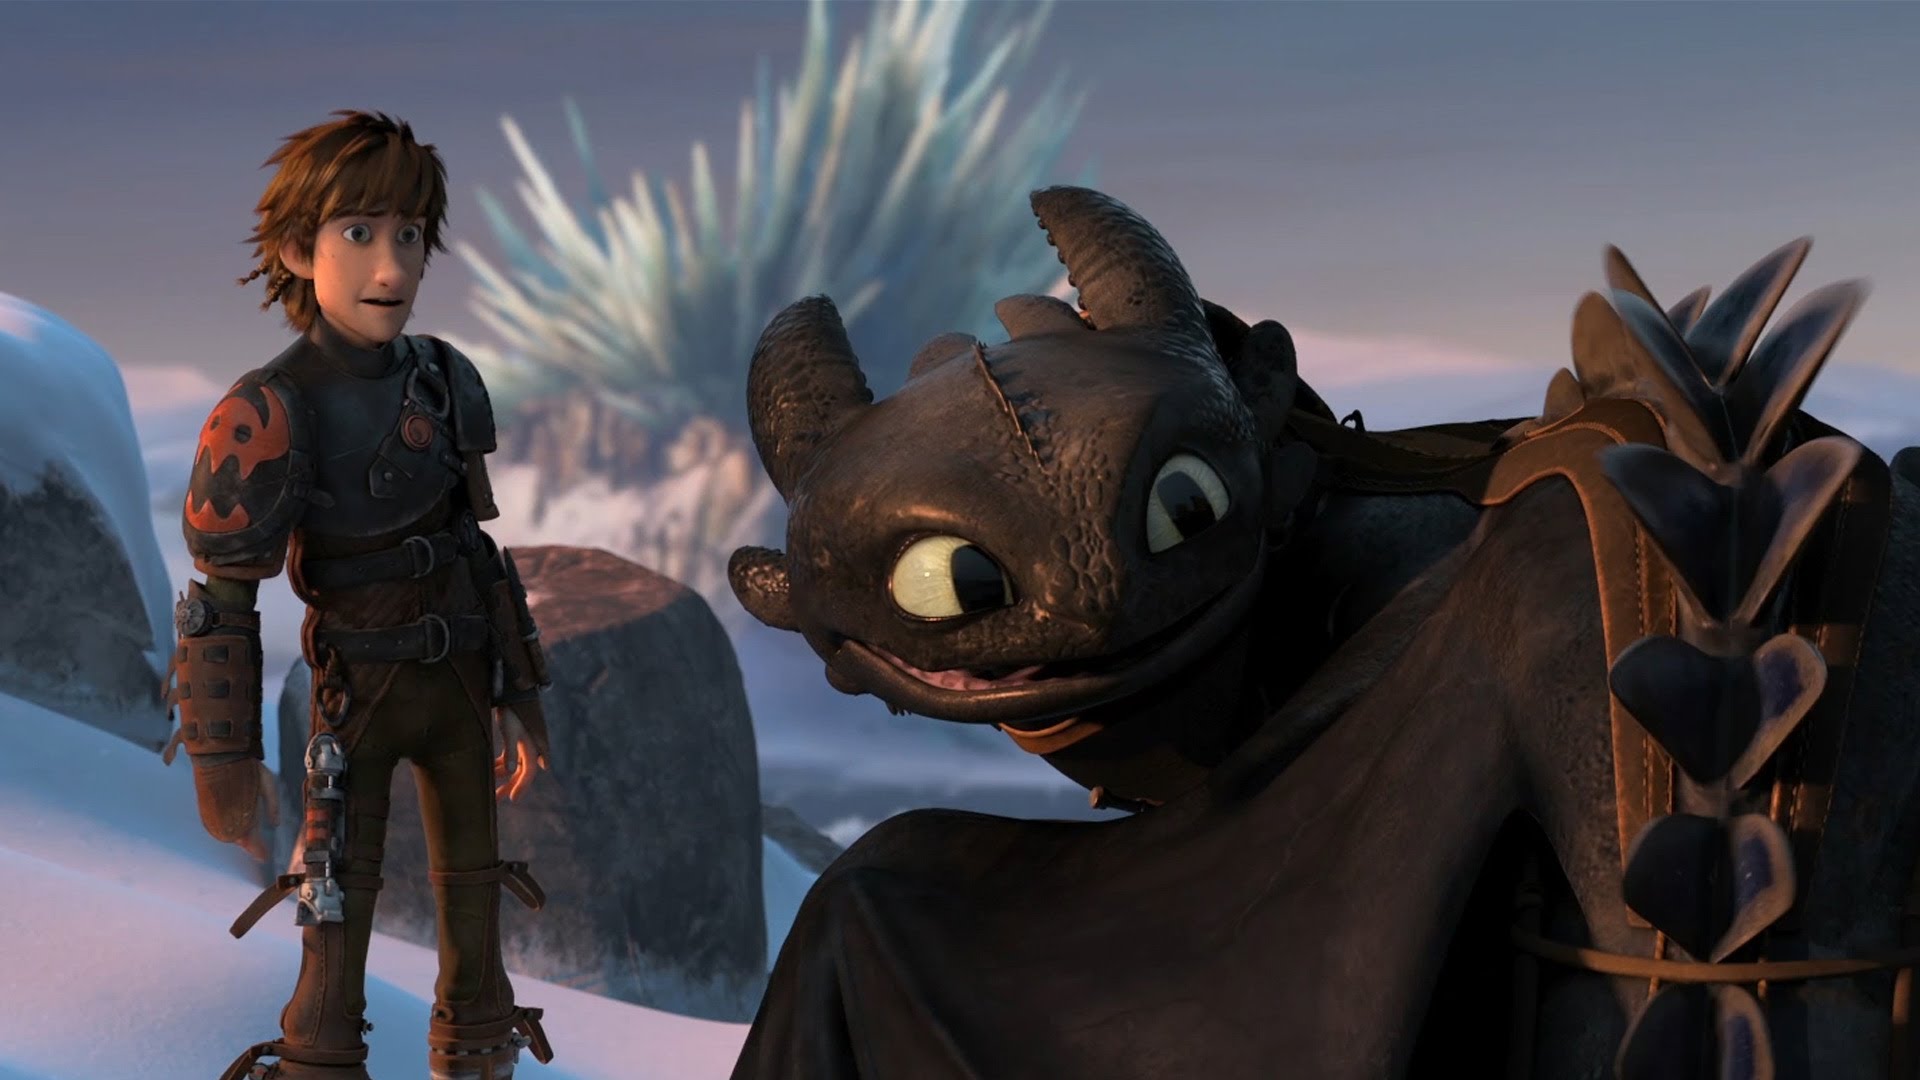 How To Train Your Dragon 2 HD wallpapers, Desktop wallpaper - most viewed